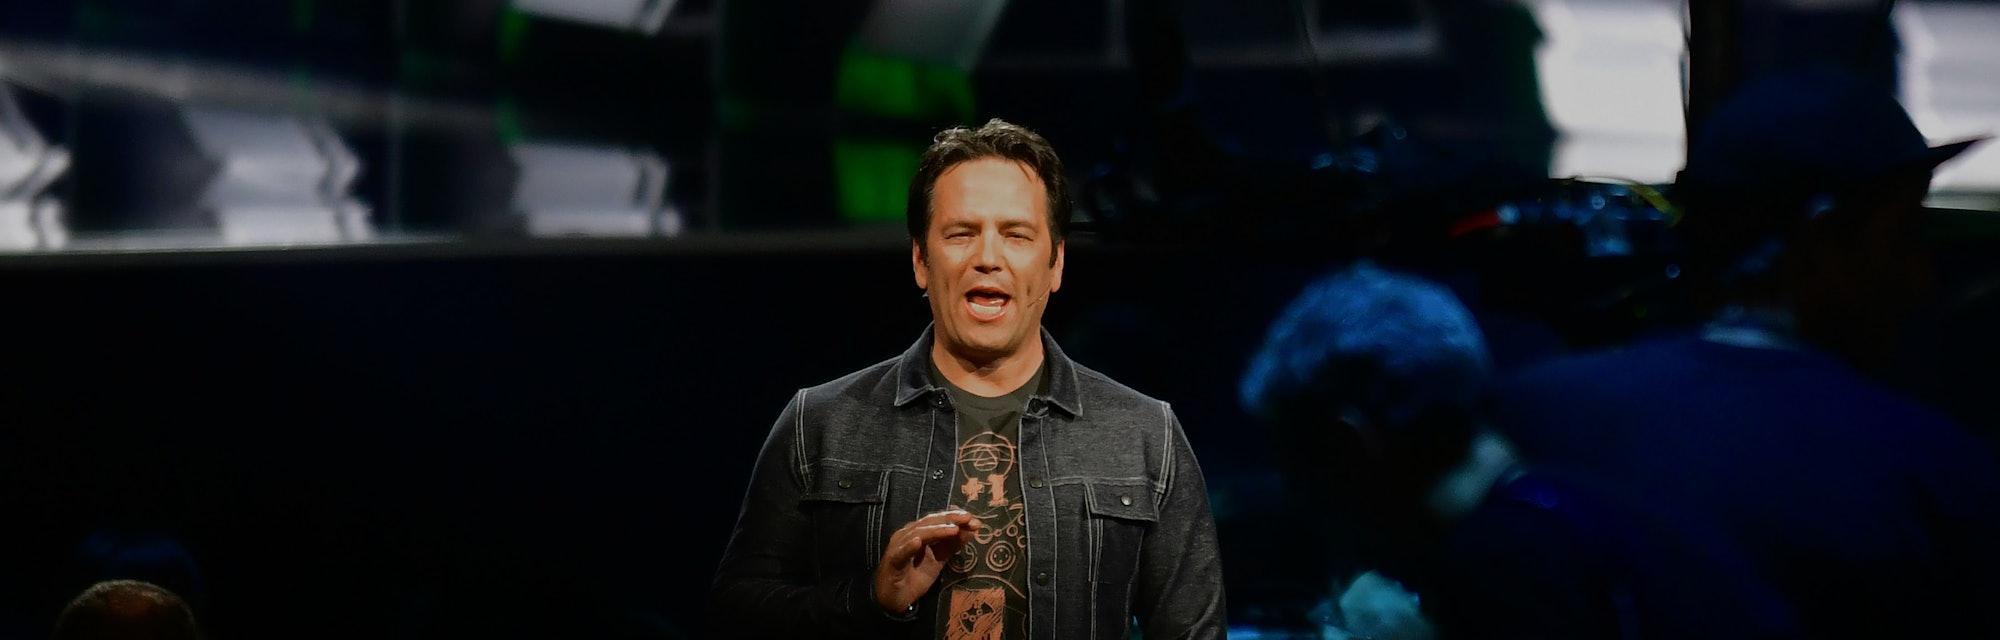 Phil Spencer, Executive President of Gaming at Microsoft addresses the audience at the Xbox 2018 E3 ...